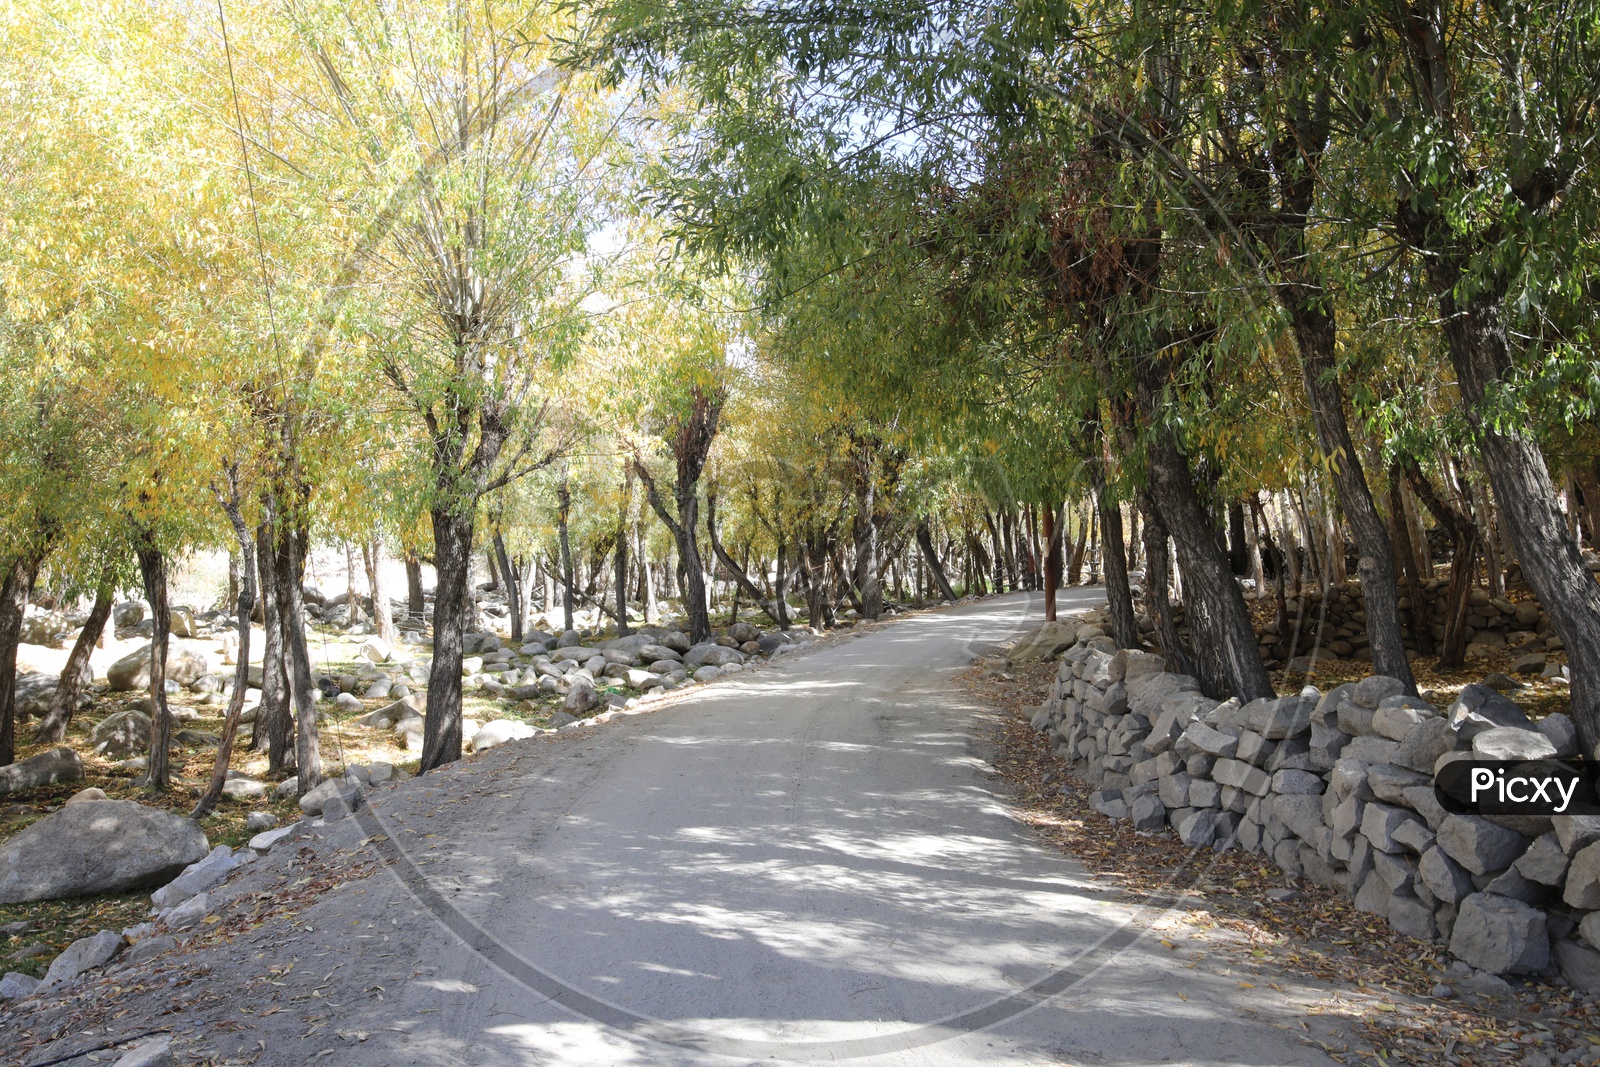 Beeautiful Pathways / Roads With Trees On Both Sides Of Road in Leh